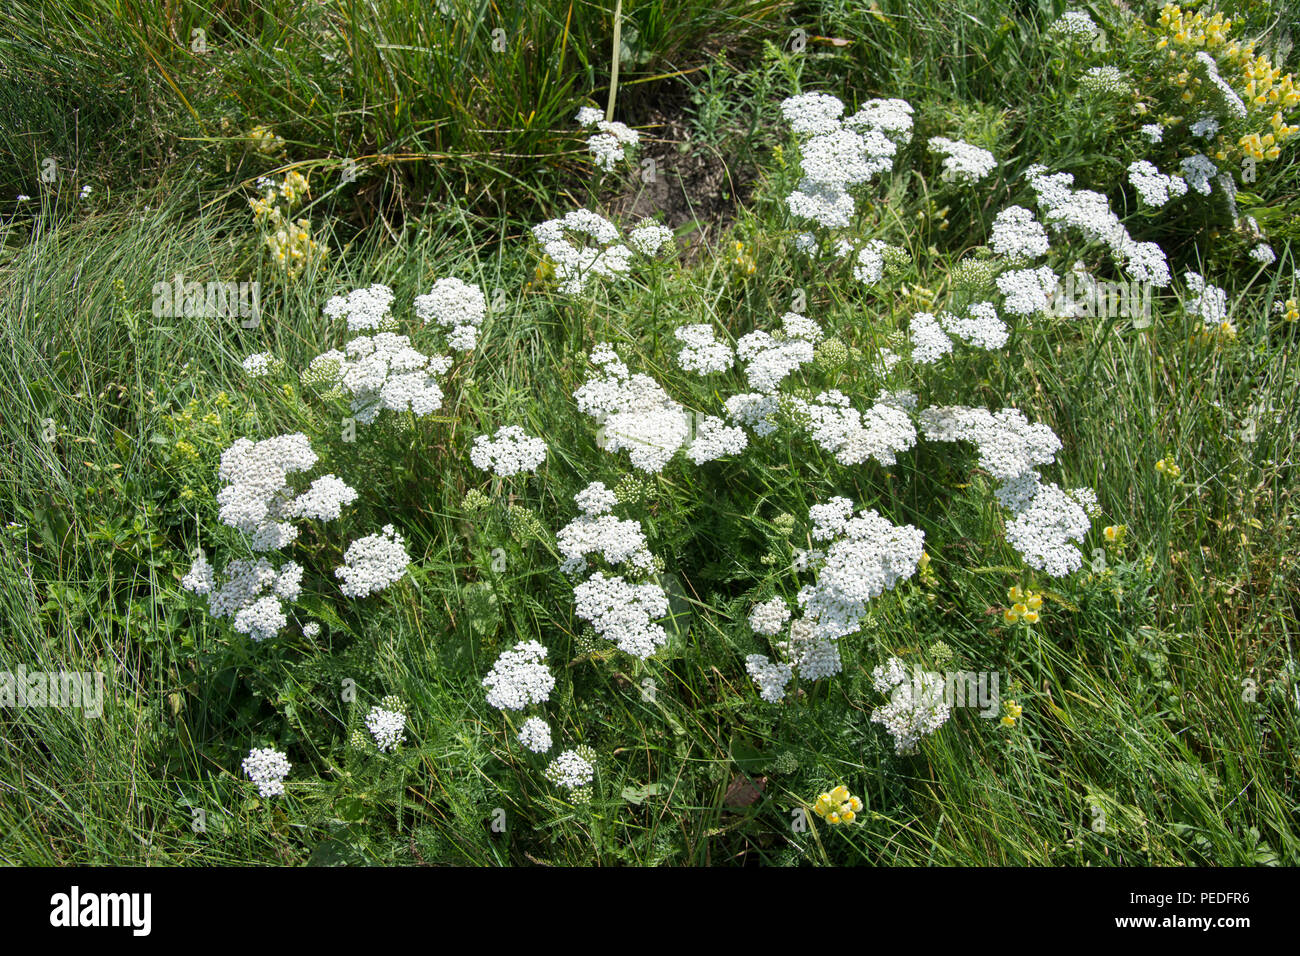 Big cluster of milfoil flowering plants on a green meadow - viewed from above Stock Photo